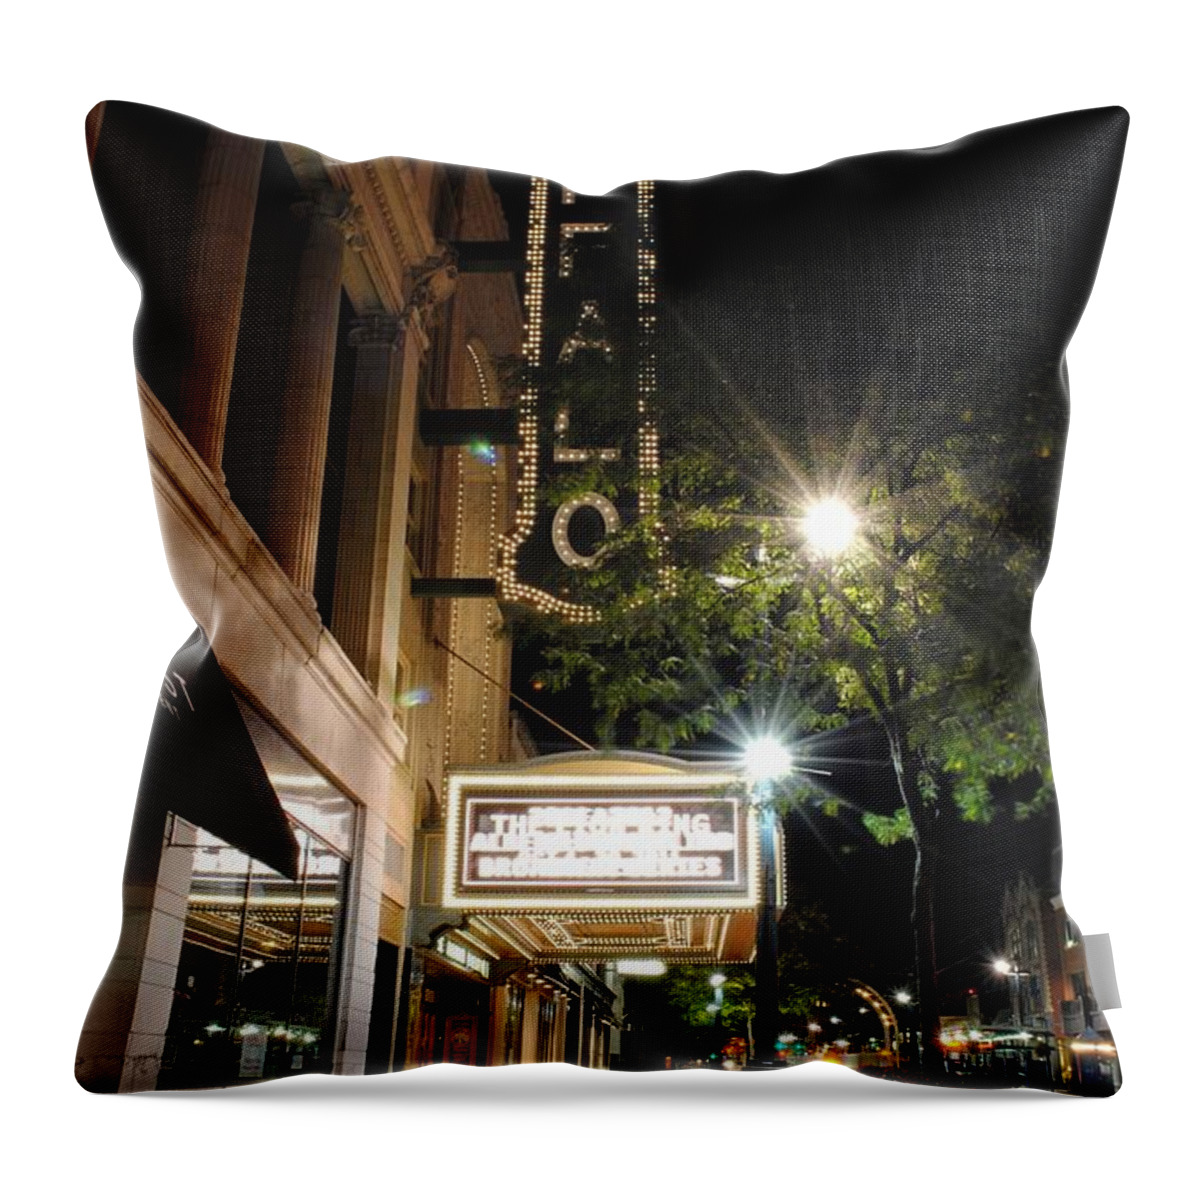  Throw Pillow featuring the photograph Sheas by Michael Frank Jr